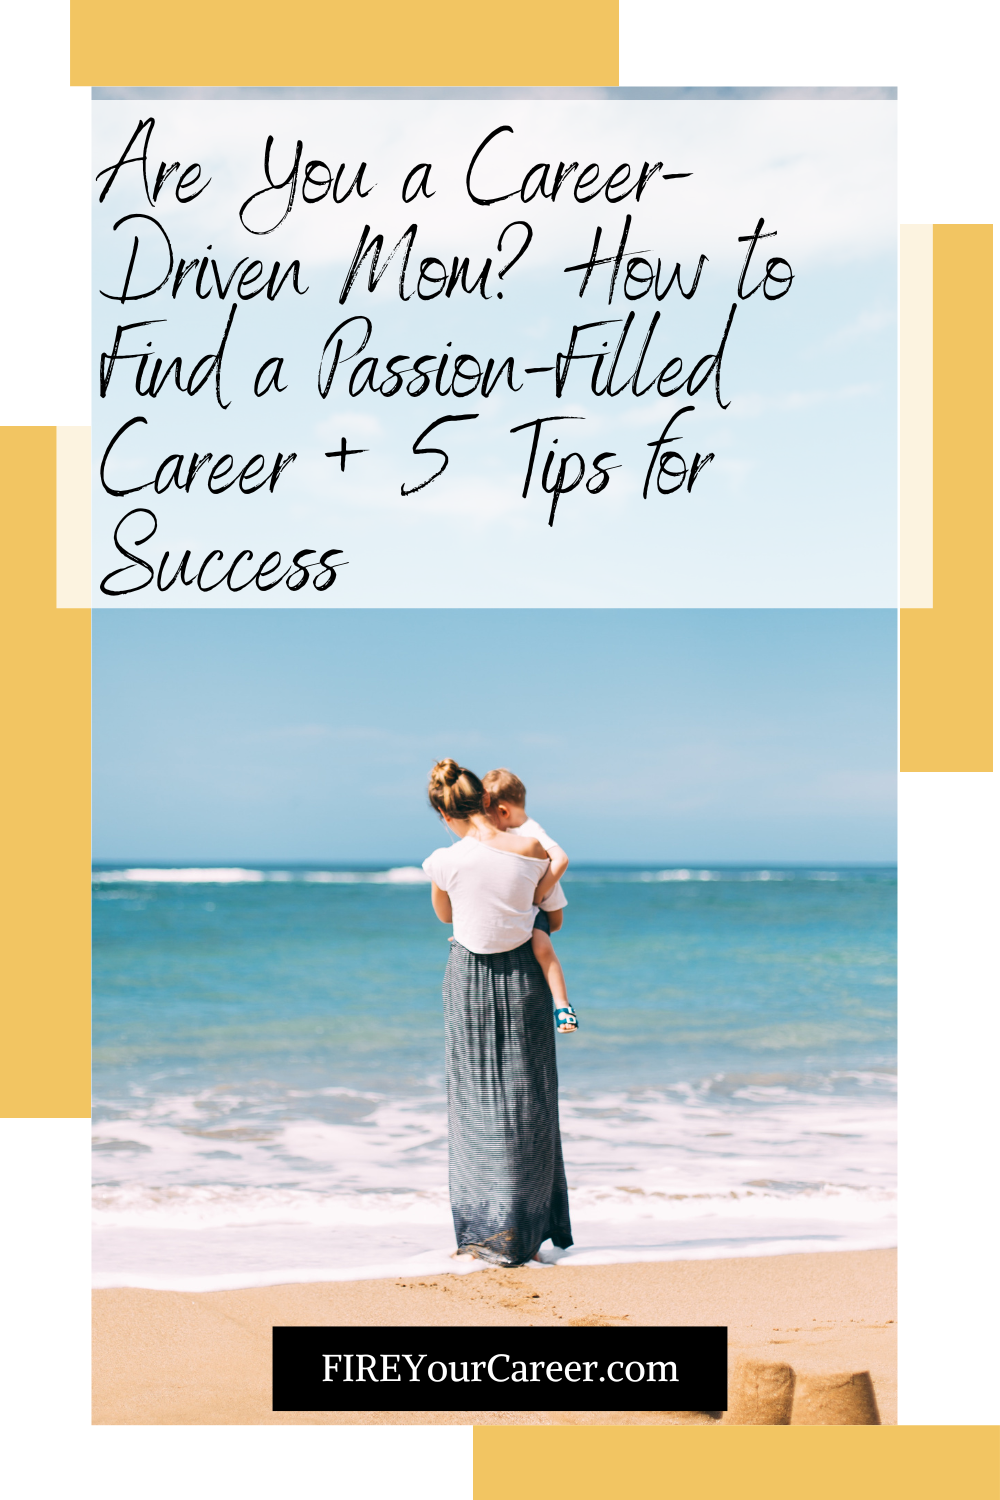 Are You a Career-Driven Mom How to Find a Passion-Filled Career + 5 Tips for Success Pinterest (1)